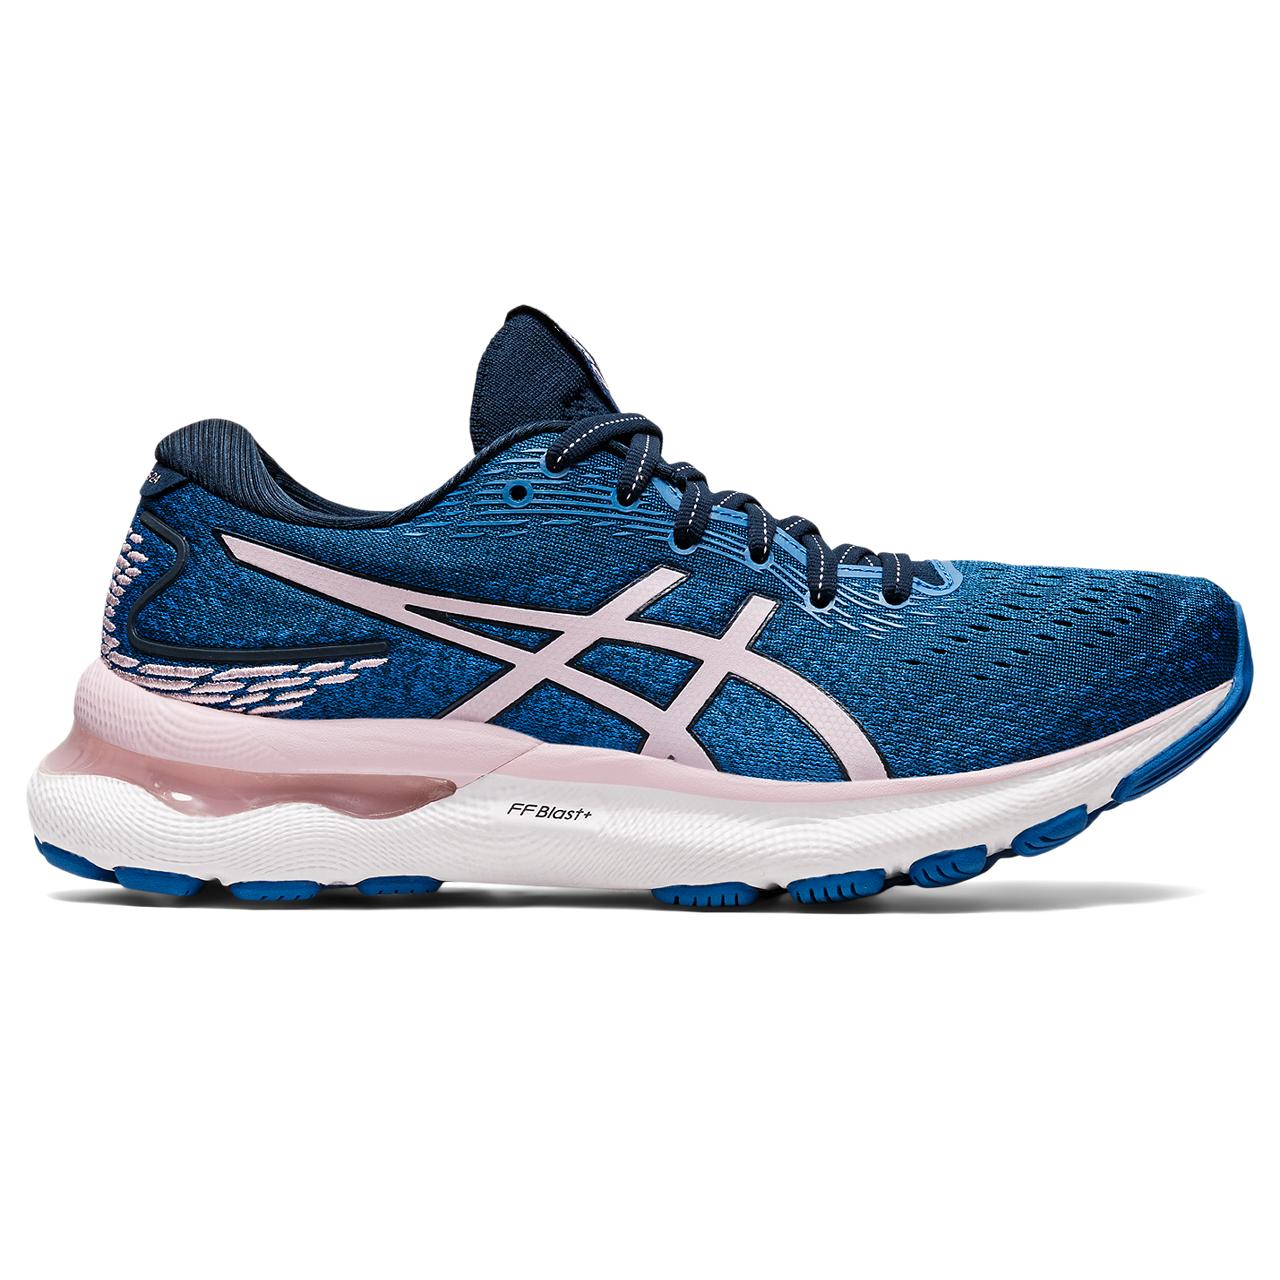 The Women's Nimbus 24 is one of the classics from ASICS.  It's been one of the best-selling cushioned neutral shoes for many years and will no doubt continue that trend with version 24. This product is in the color French Blue / Barely Rose.